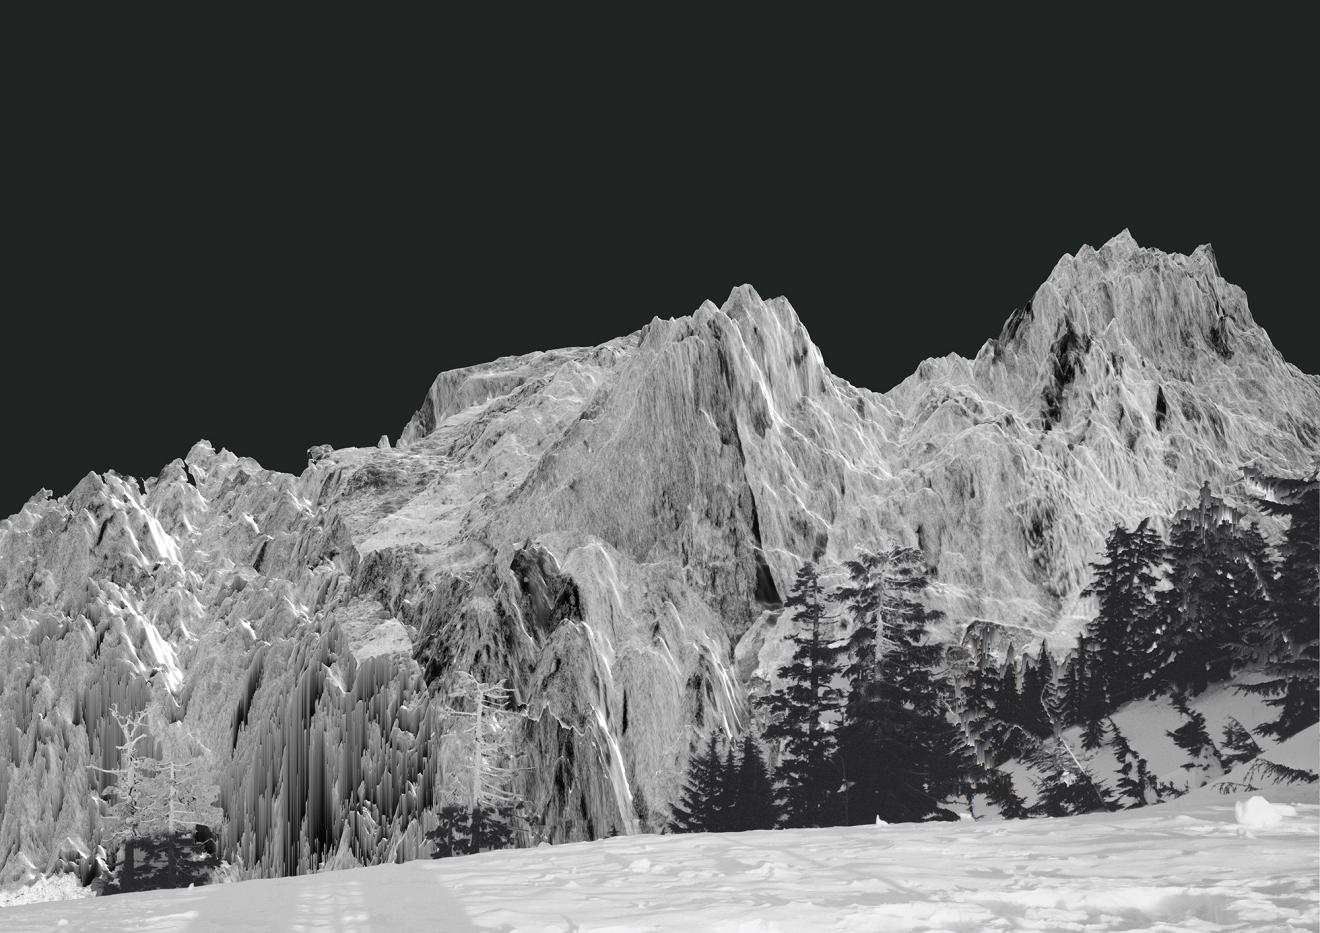 Black and white photograph of rocky mountain peaks covered in ice